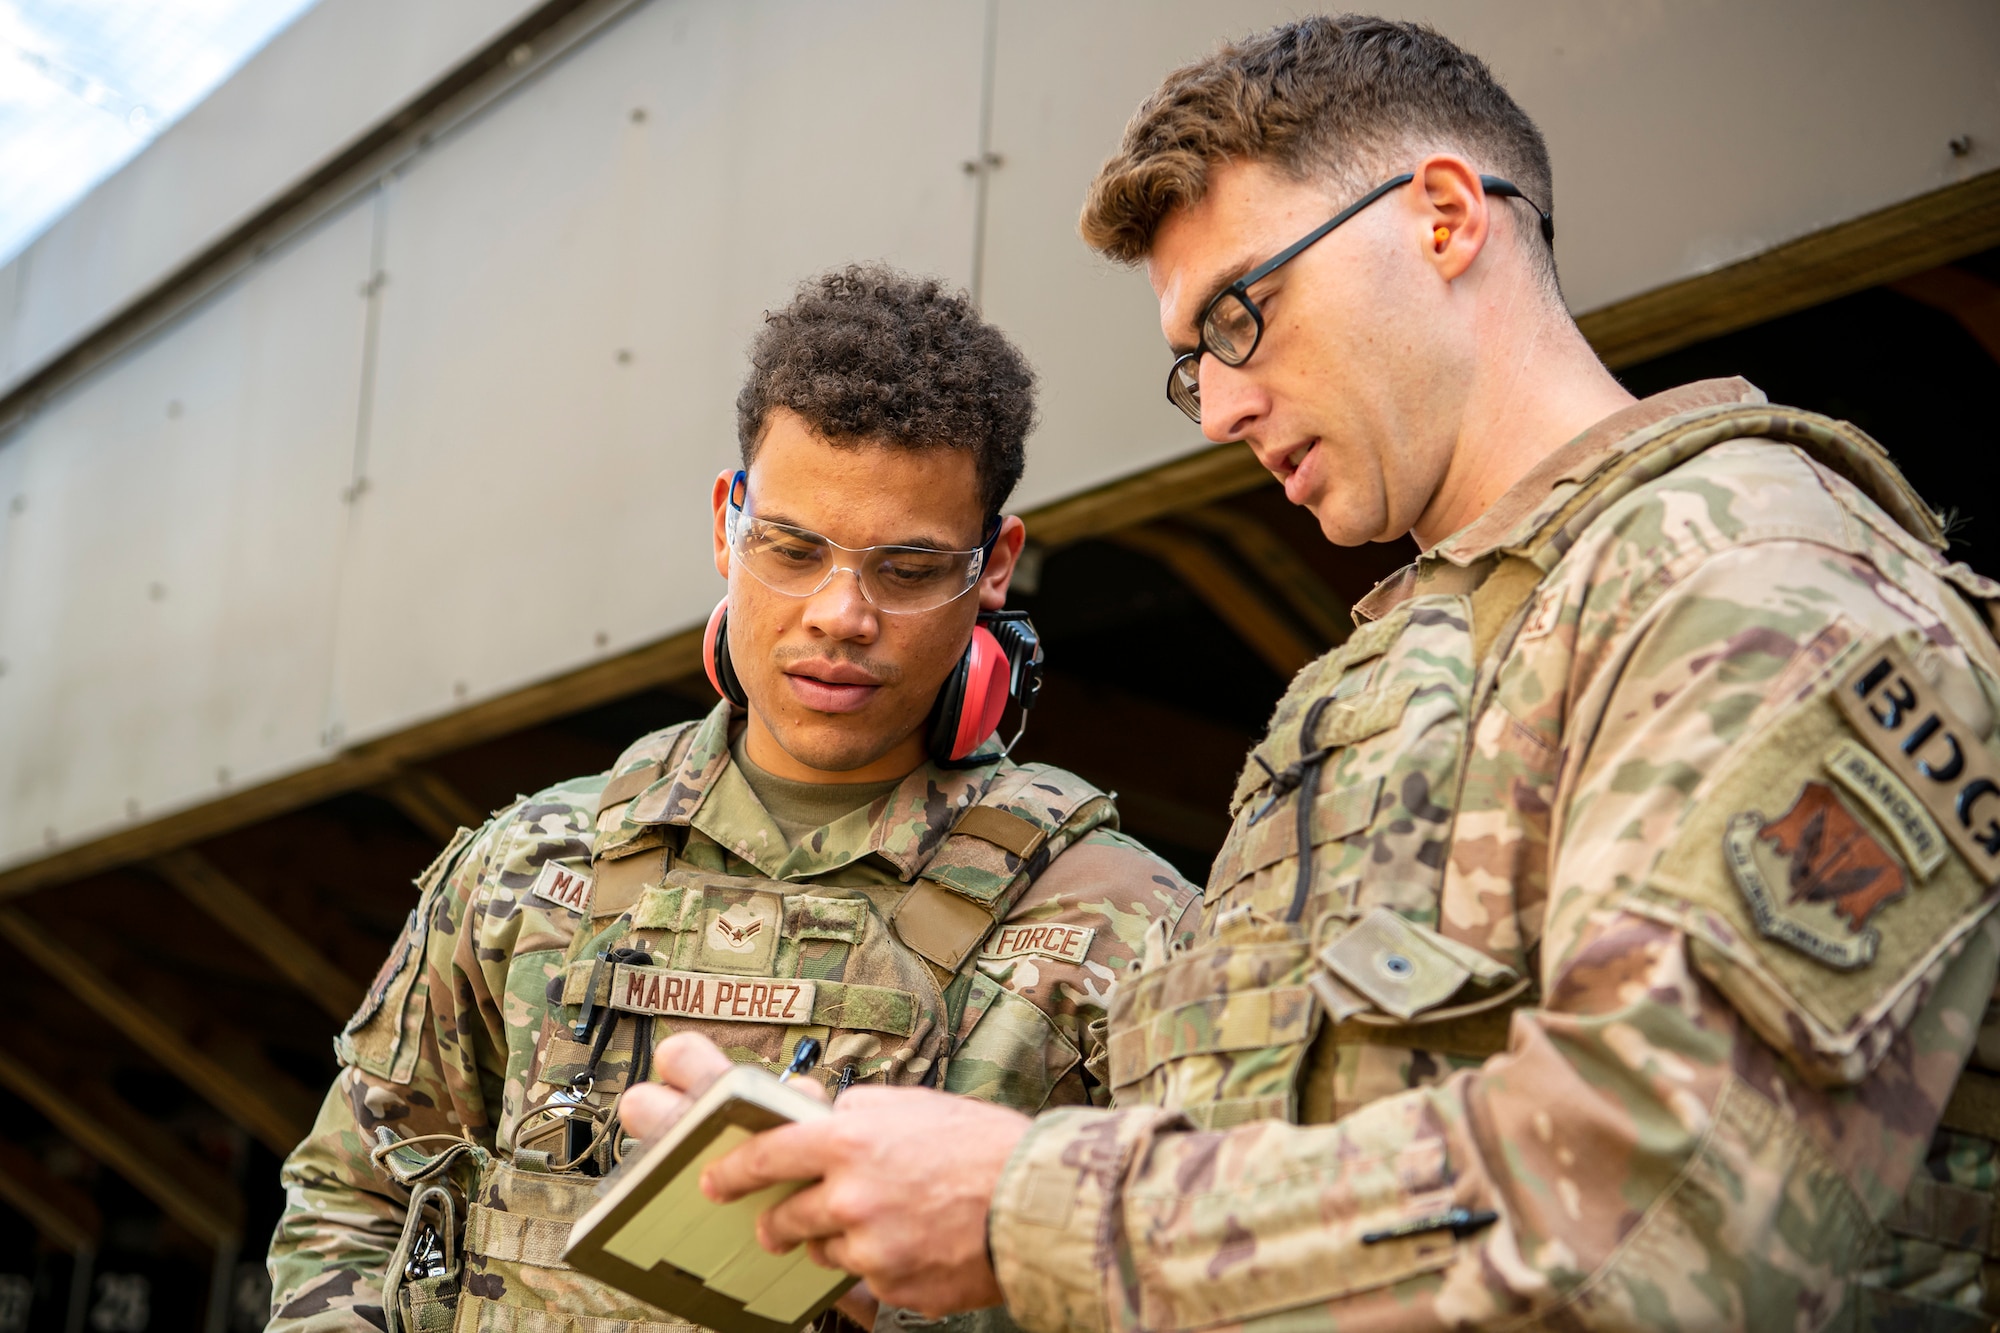 An instructor from the 820th Base Defense Group, right, speaks with Airman 1st Class Richard Maria Perez, 423d Security Forces Squadron flight member, during a proficiency course at RAF Molesworth, England, Aug. 19, 2022. During the course instructors from the 820th Base Defense Group and 435th Contingency Response Group provided oversight and guidance to help critique and advance the combat arms skills of the defenders from the 423d SFS. (U.S. Air Force photo by Staff Sgt. Eugene Oliver)